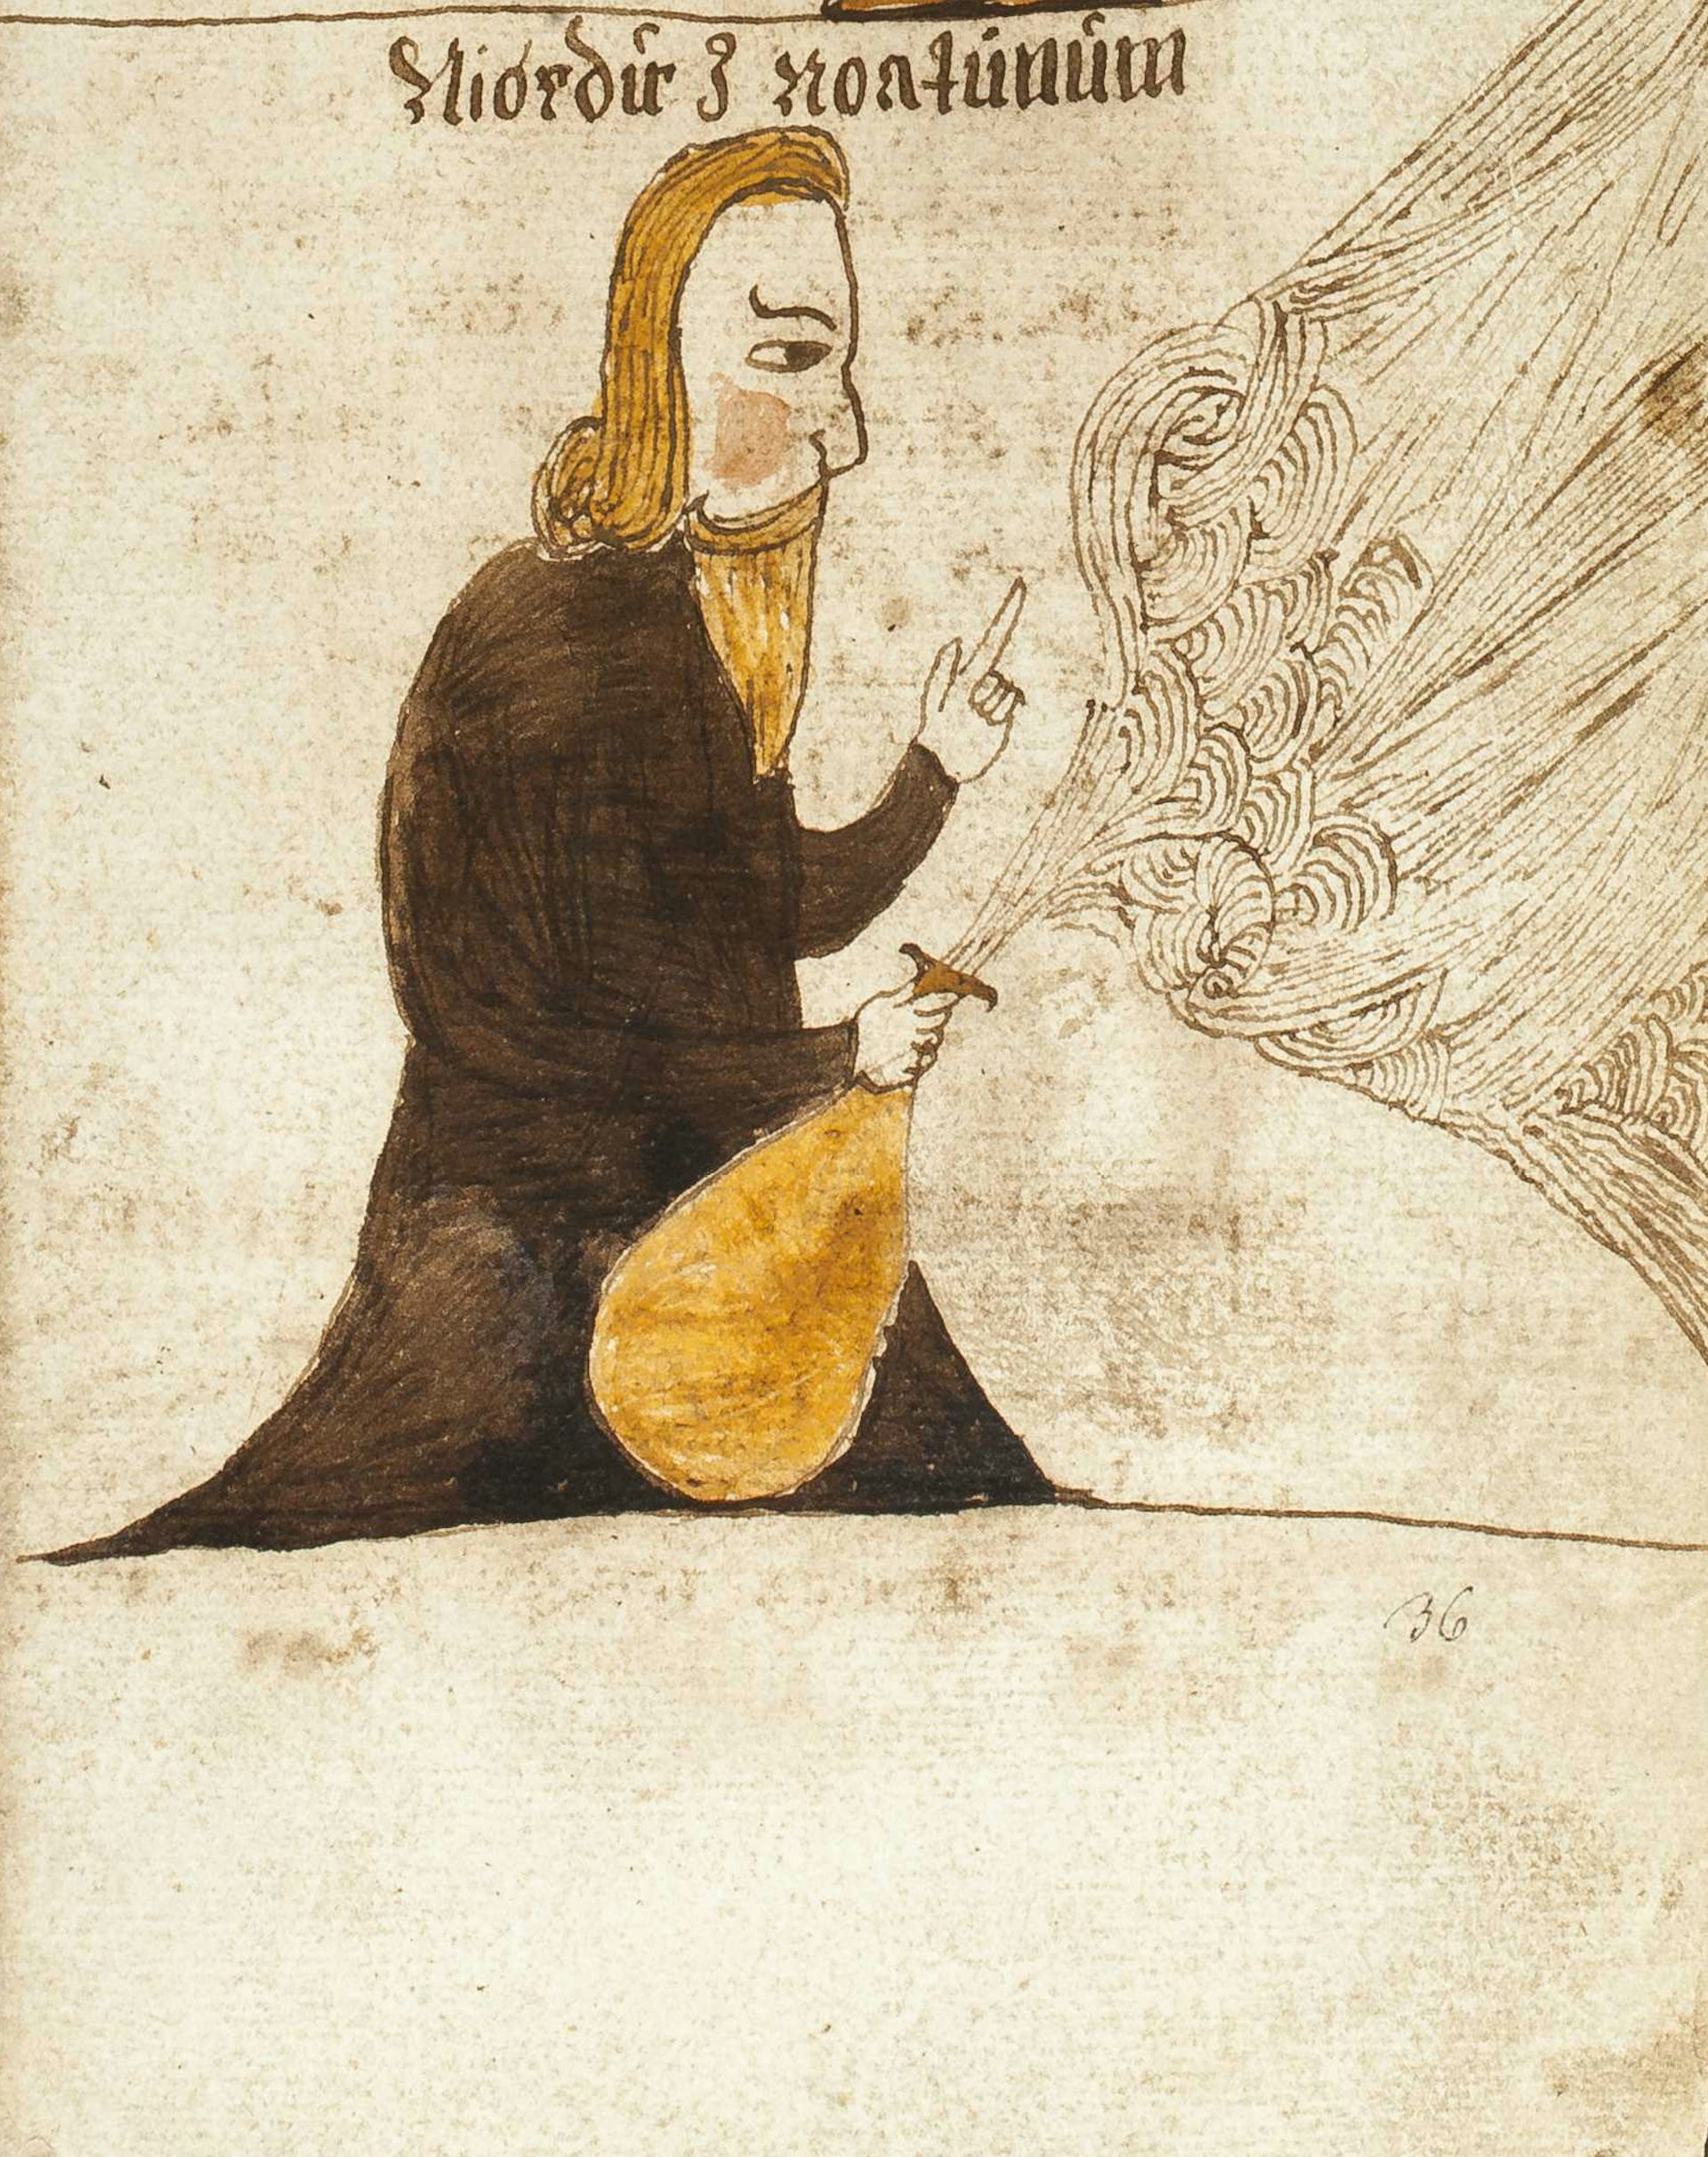 Njord unleashing a bag of winds from Icelandic Snorra Edda (1680)